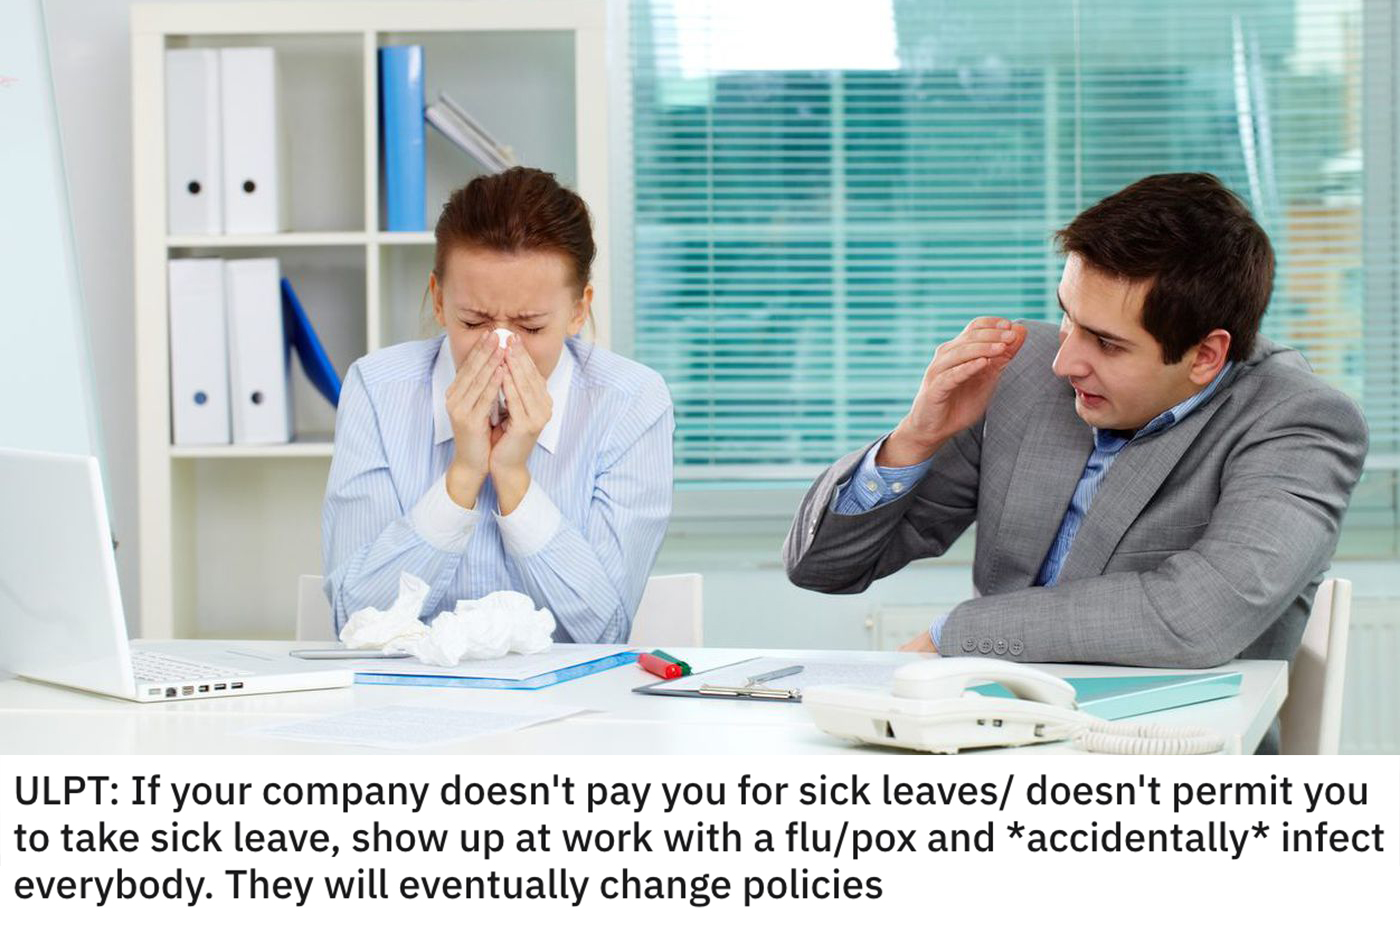 life hacks - If your company doesn't pay you for sick leaves doesn't permit you to take sick leave, show up at work with a flu/pox and accidentally infect everybody. They will eventually change policies